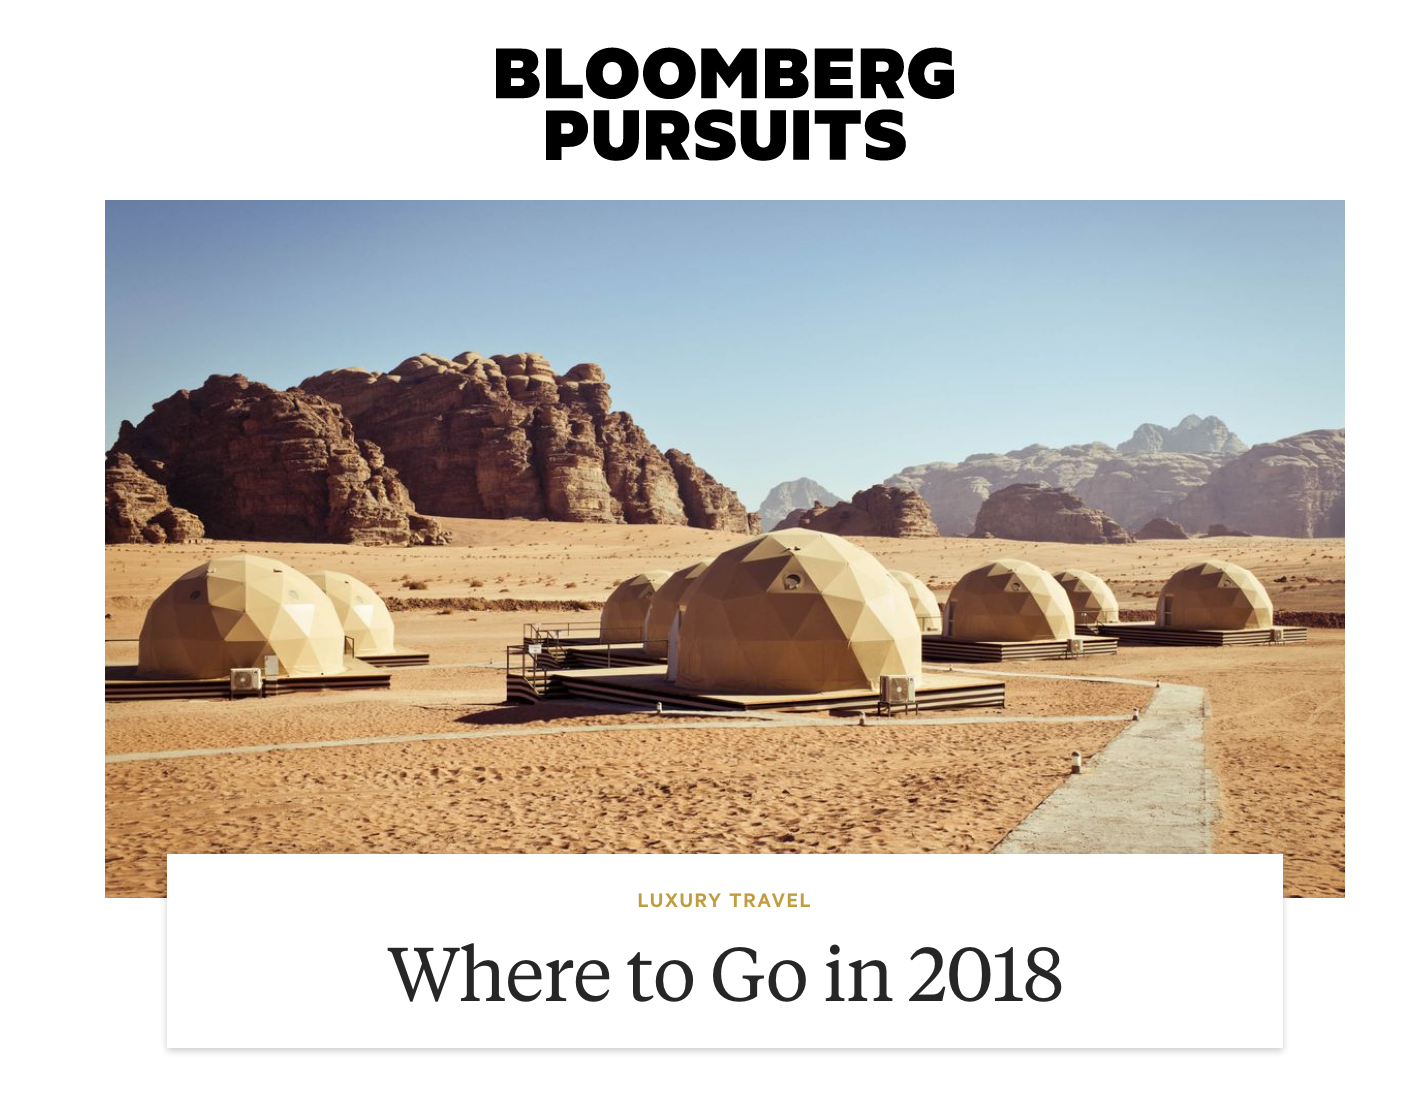 Bloomberg Pursuits: Where to Go in 2018